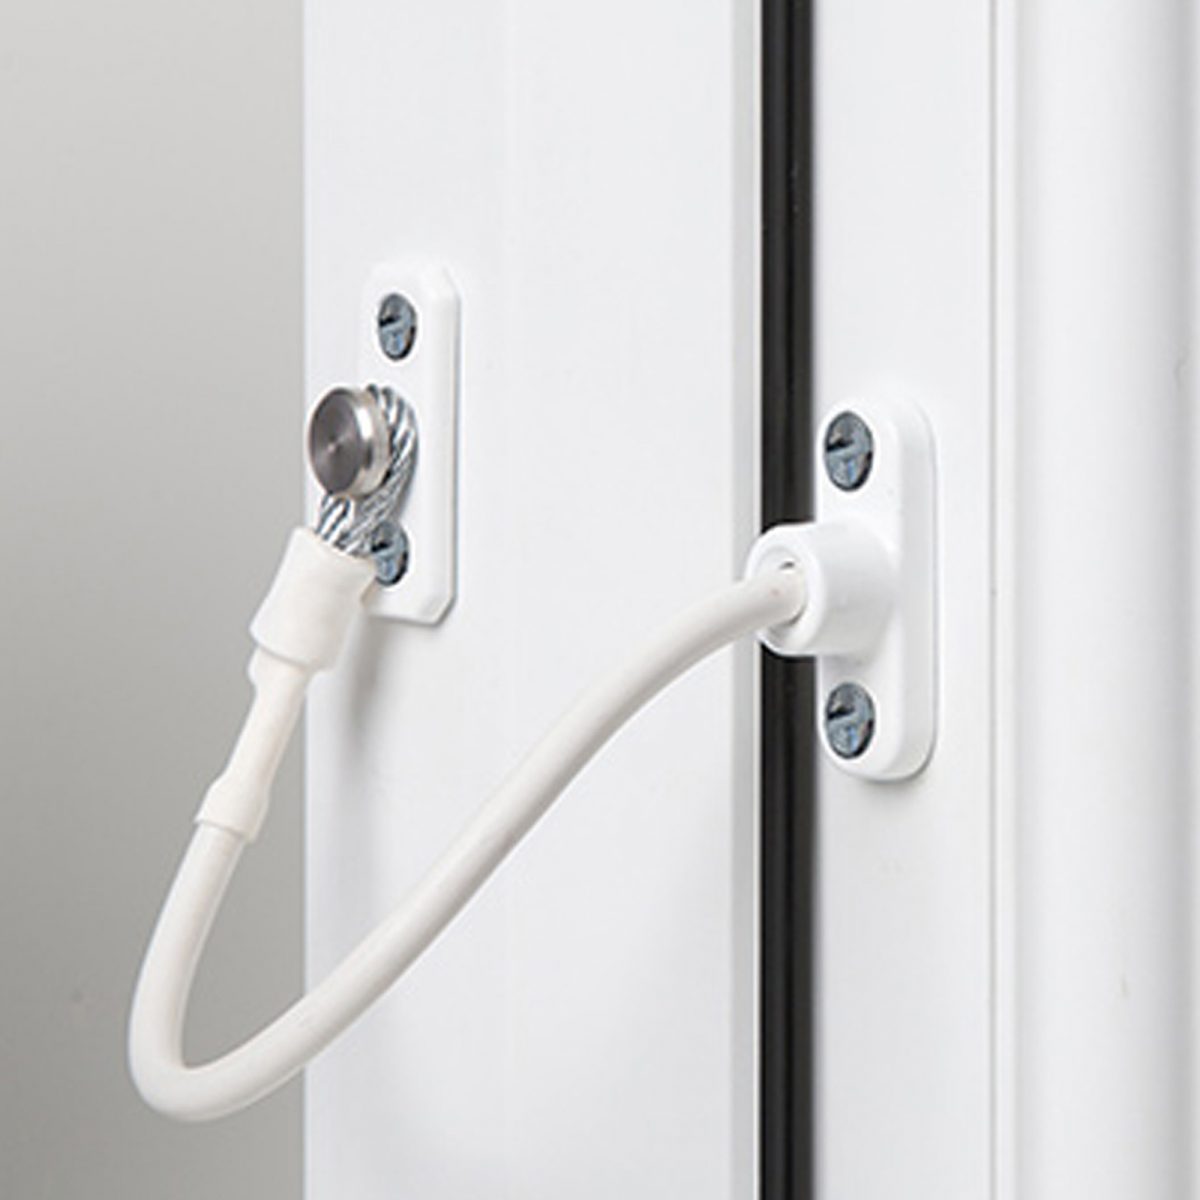 Cable window restrictor